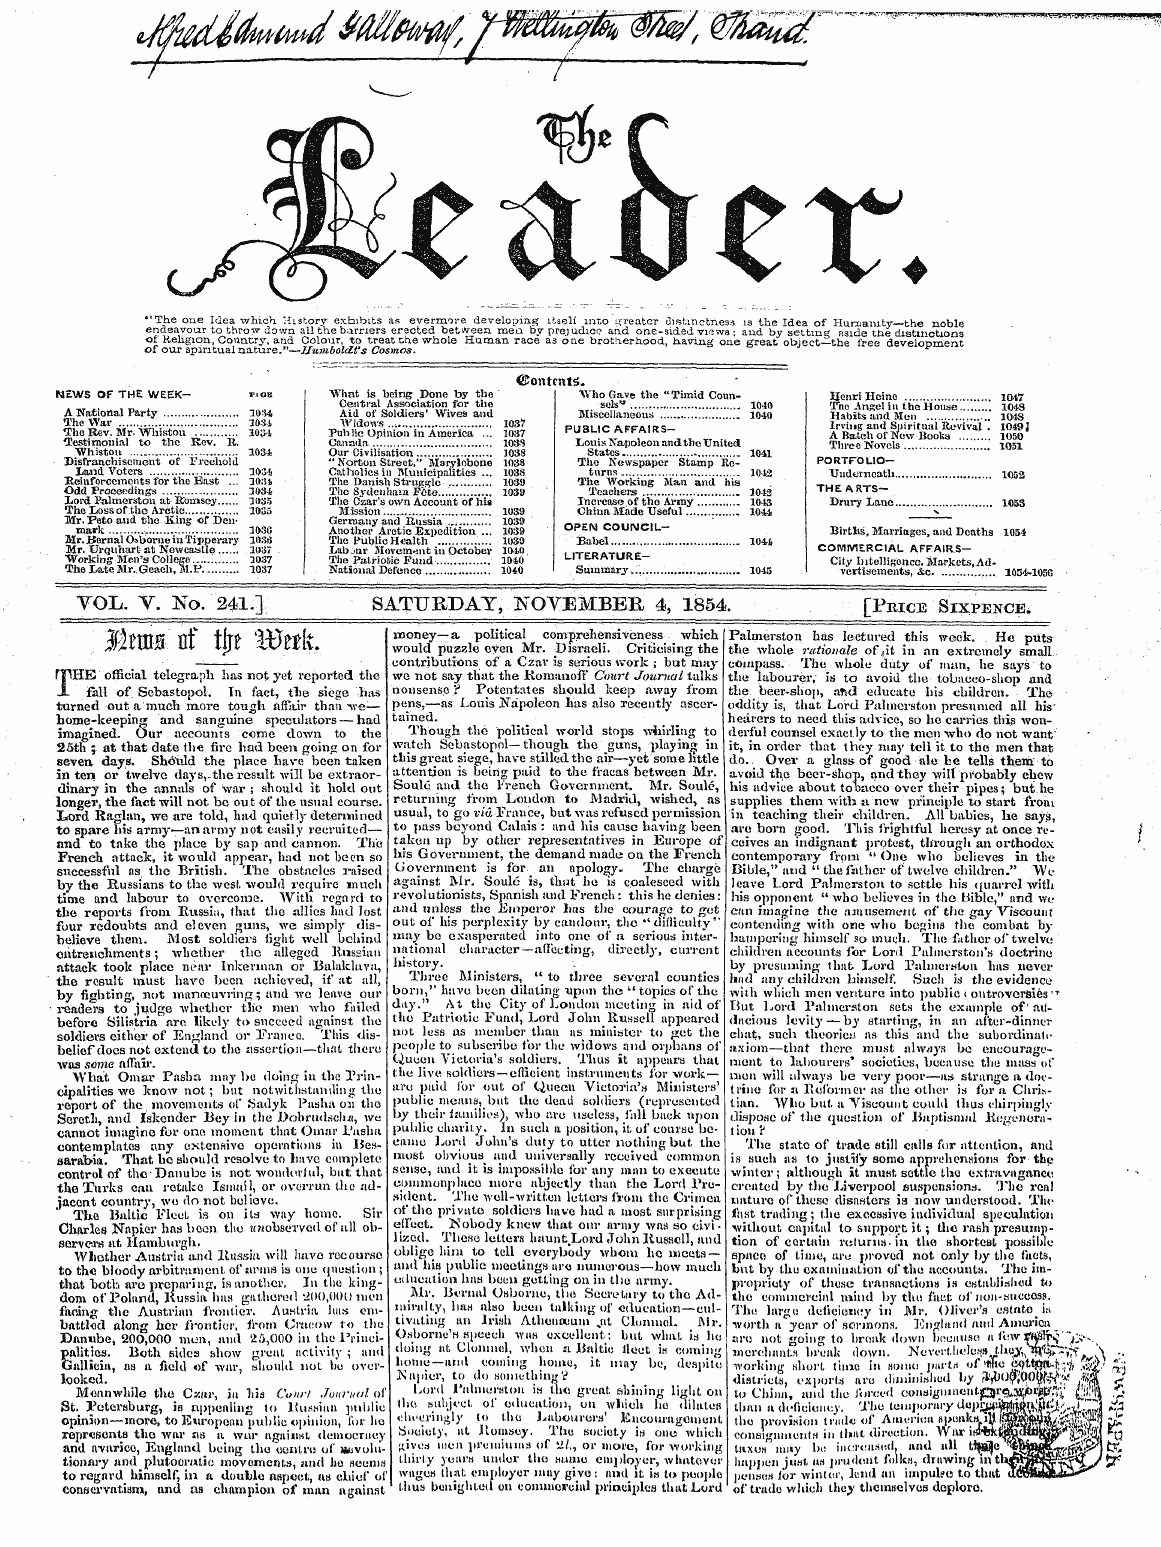 Leader (1850-1860): jS F Y, Country edition - The Official Telegraph Lias Not Yet Repo...